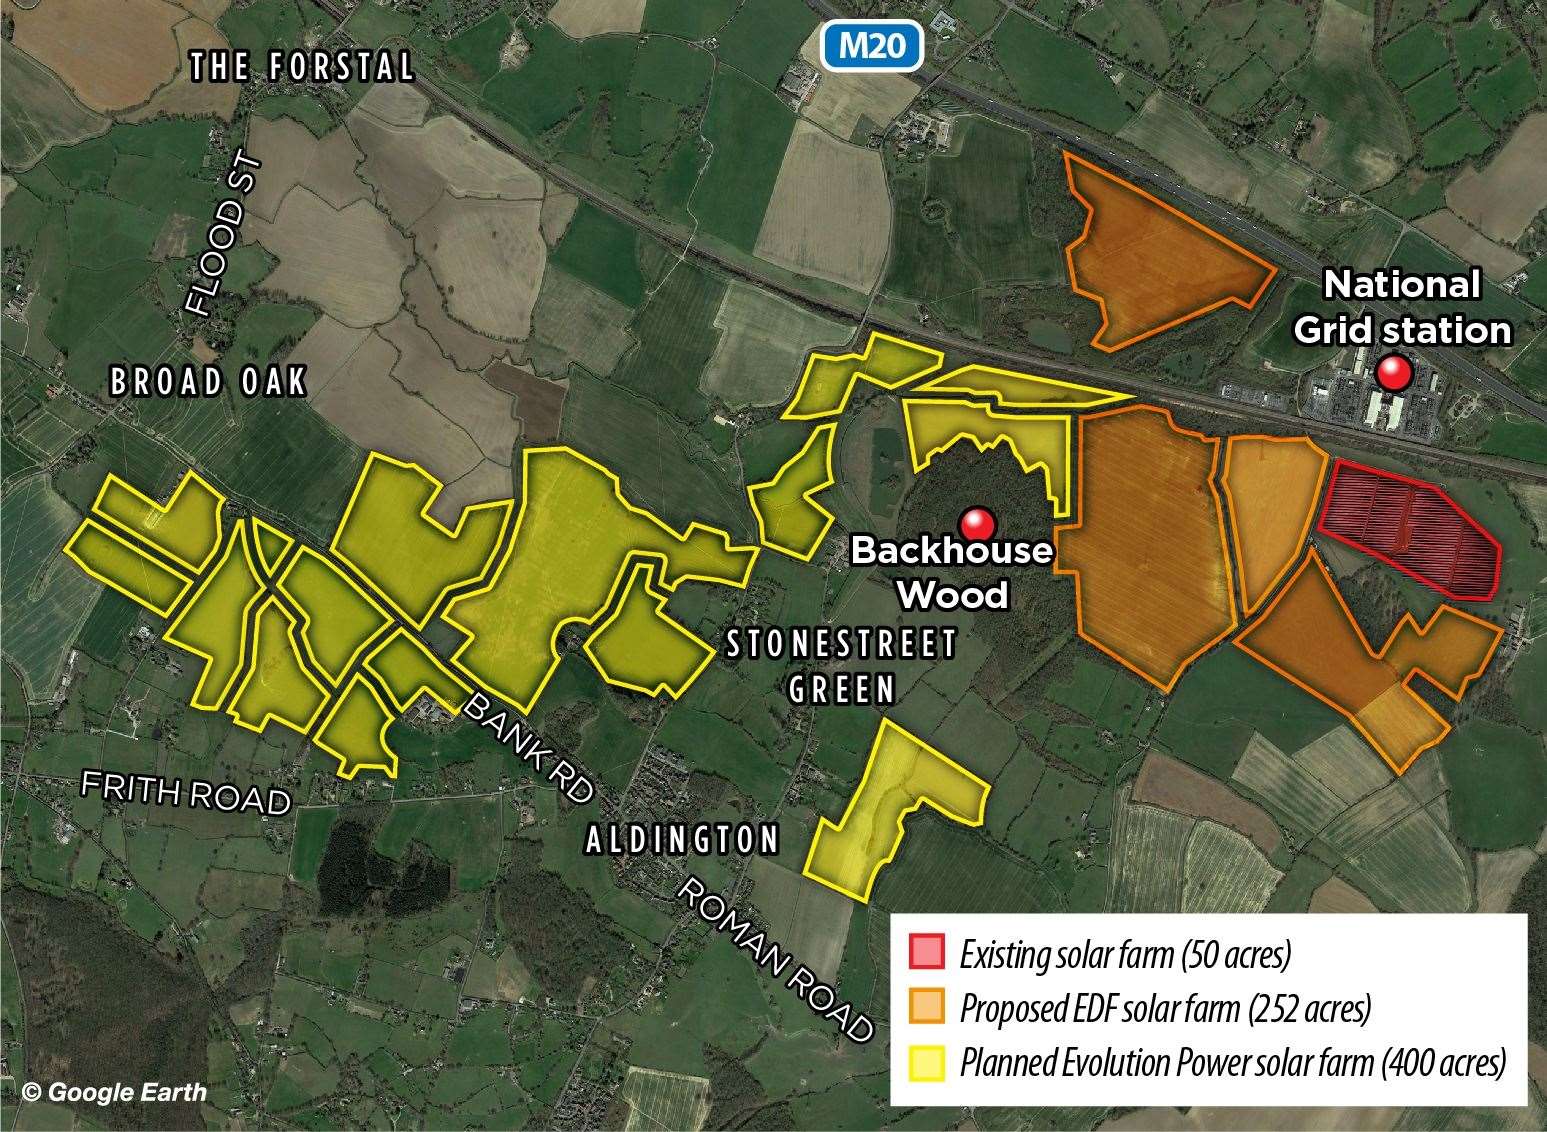 A map showing the solar farms planned for the area